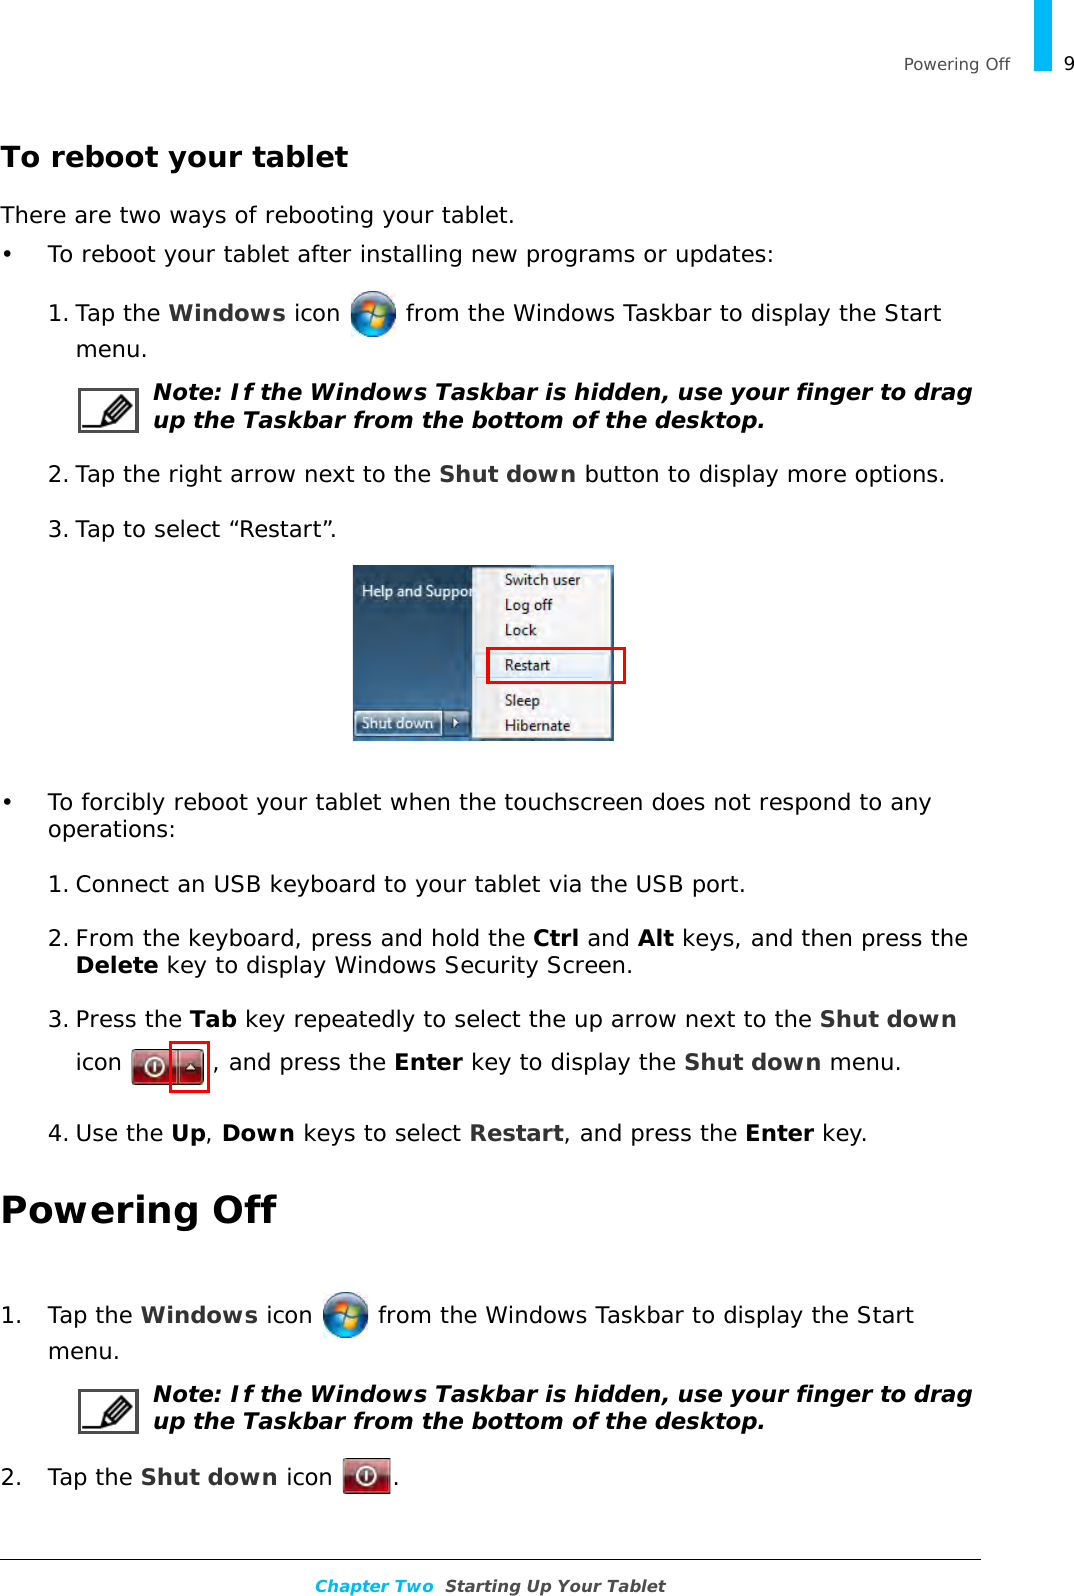   Powering Off 9Chapter Two  Starting Up Your TabletTo reboot your tabletThere are two ways of rebooting your tablet.• To reboot your tablet after installing new programs or updates:1. Tap the Windows icon   from the Windows Taskbar to display the Start menu.Note: If the Windows Taskbar is hidden, use your finger to drag up the Taskbar from the bottom of the desktop.2. Tap the right arrow next to the Shut down button to display more options.3. Tap to select “Restart”.• To forcibly reboot your tablet when the touchscreen does not respond to any operations:1. Connect an USB keyboard to your tablet via the USB port.2. From the keyboard, press and hold the Ctrl and Alt keys, and then press the Delete key to display Windows Security Screen.3. Press the Tab key repeatedly to select the up arrow next to the Shut down icon  , and press the Enter key to display the Shut down menu.4. Use the Up, Down keys to select Restart, and press the Enter key.Powering Off1. Tap the Windows icon   from the Windows Taskbar to display the Start menu.Note: If the Windows Taskbar is hidden, use your finger to drag up the Taskbar from the bottom of the desktop.2. Tap the Shut down icon  .